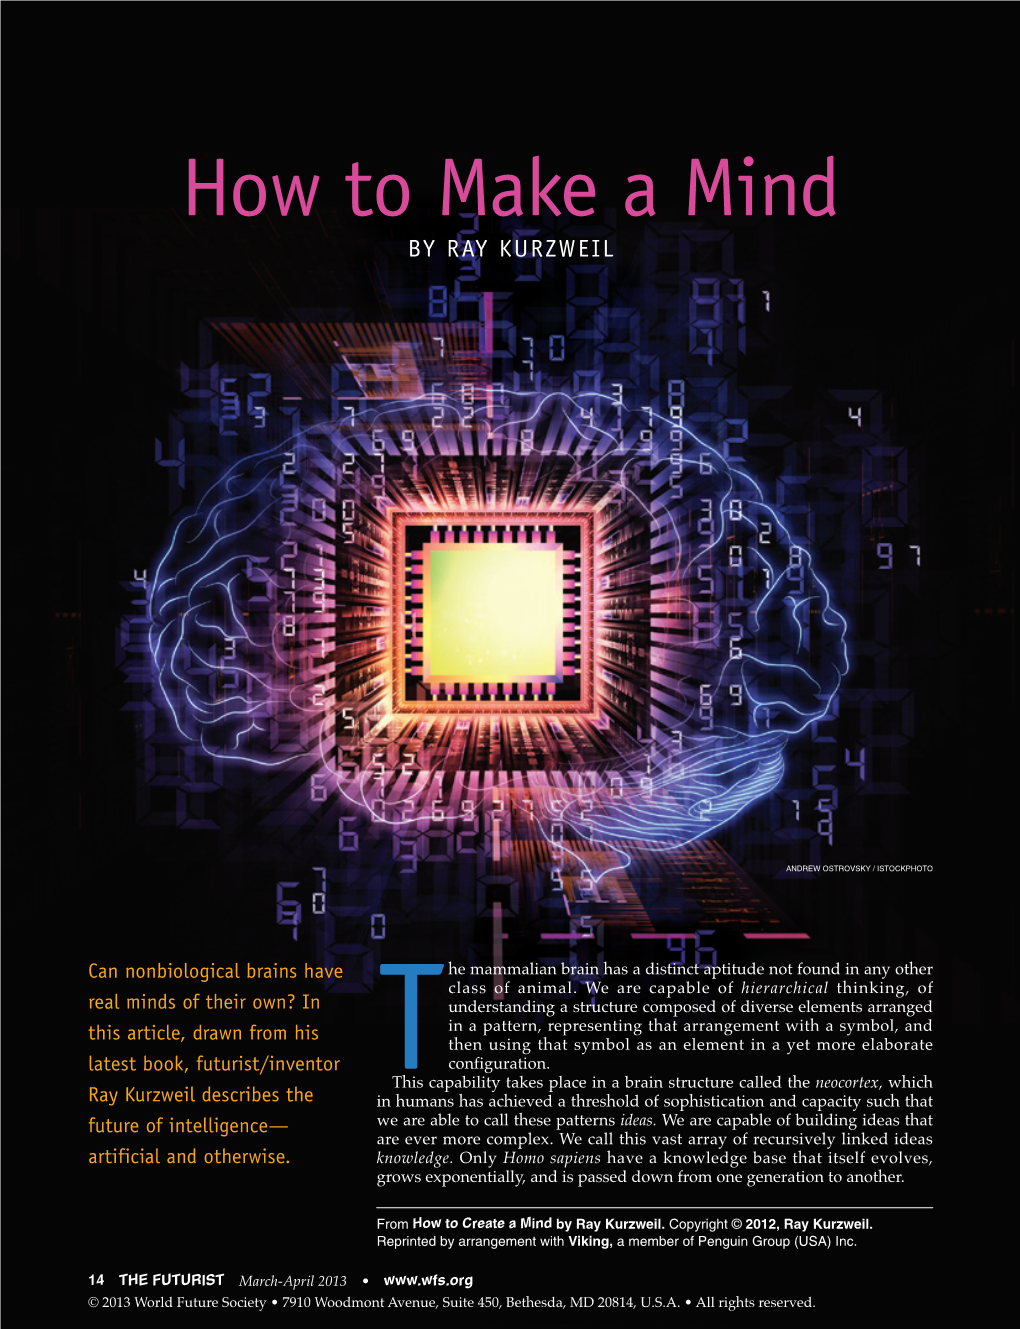 How to Make a Mind by RAY KURZWEIL